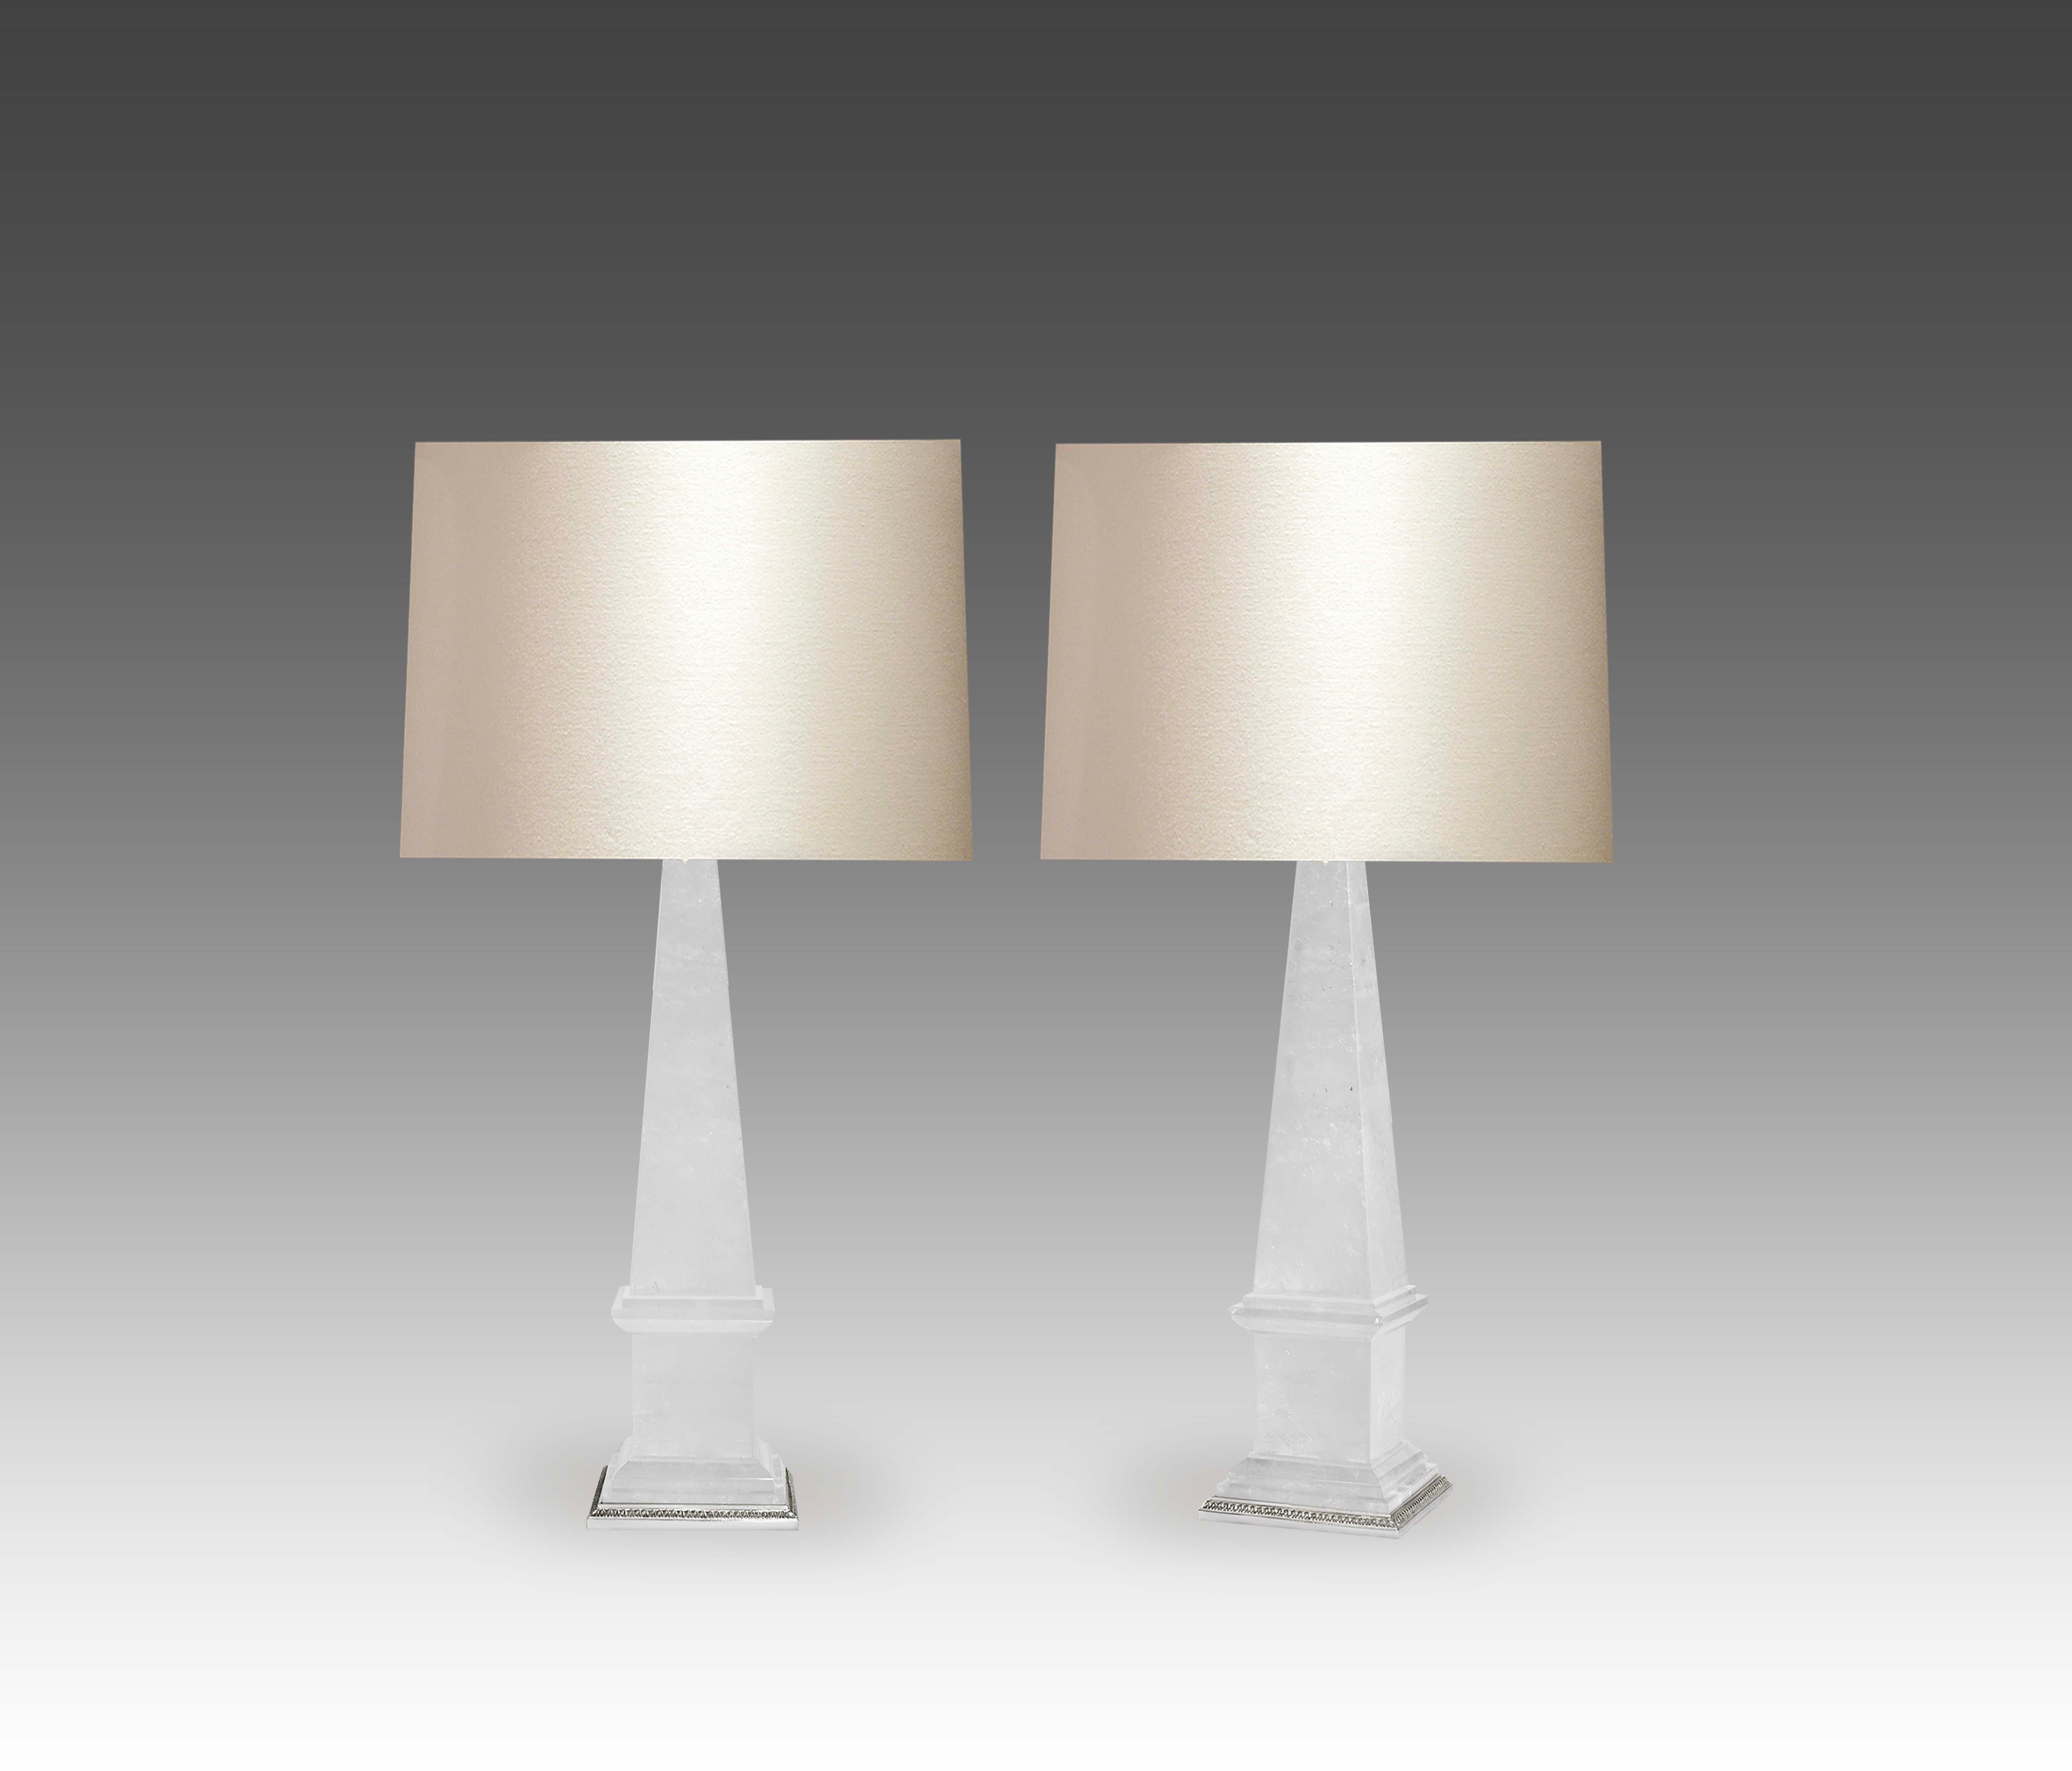 A pair of obelisk rock crystal lamps with fine castled polished nickel bases. Created by Phoenix Gallery.
Each lamp installs two sockets.
To the top of the rock crystal: 17